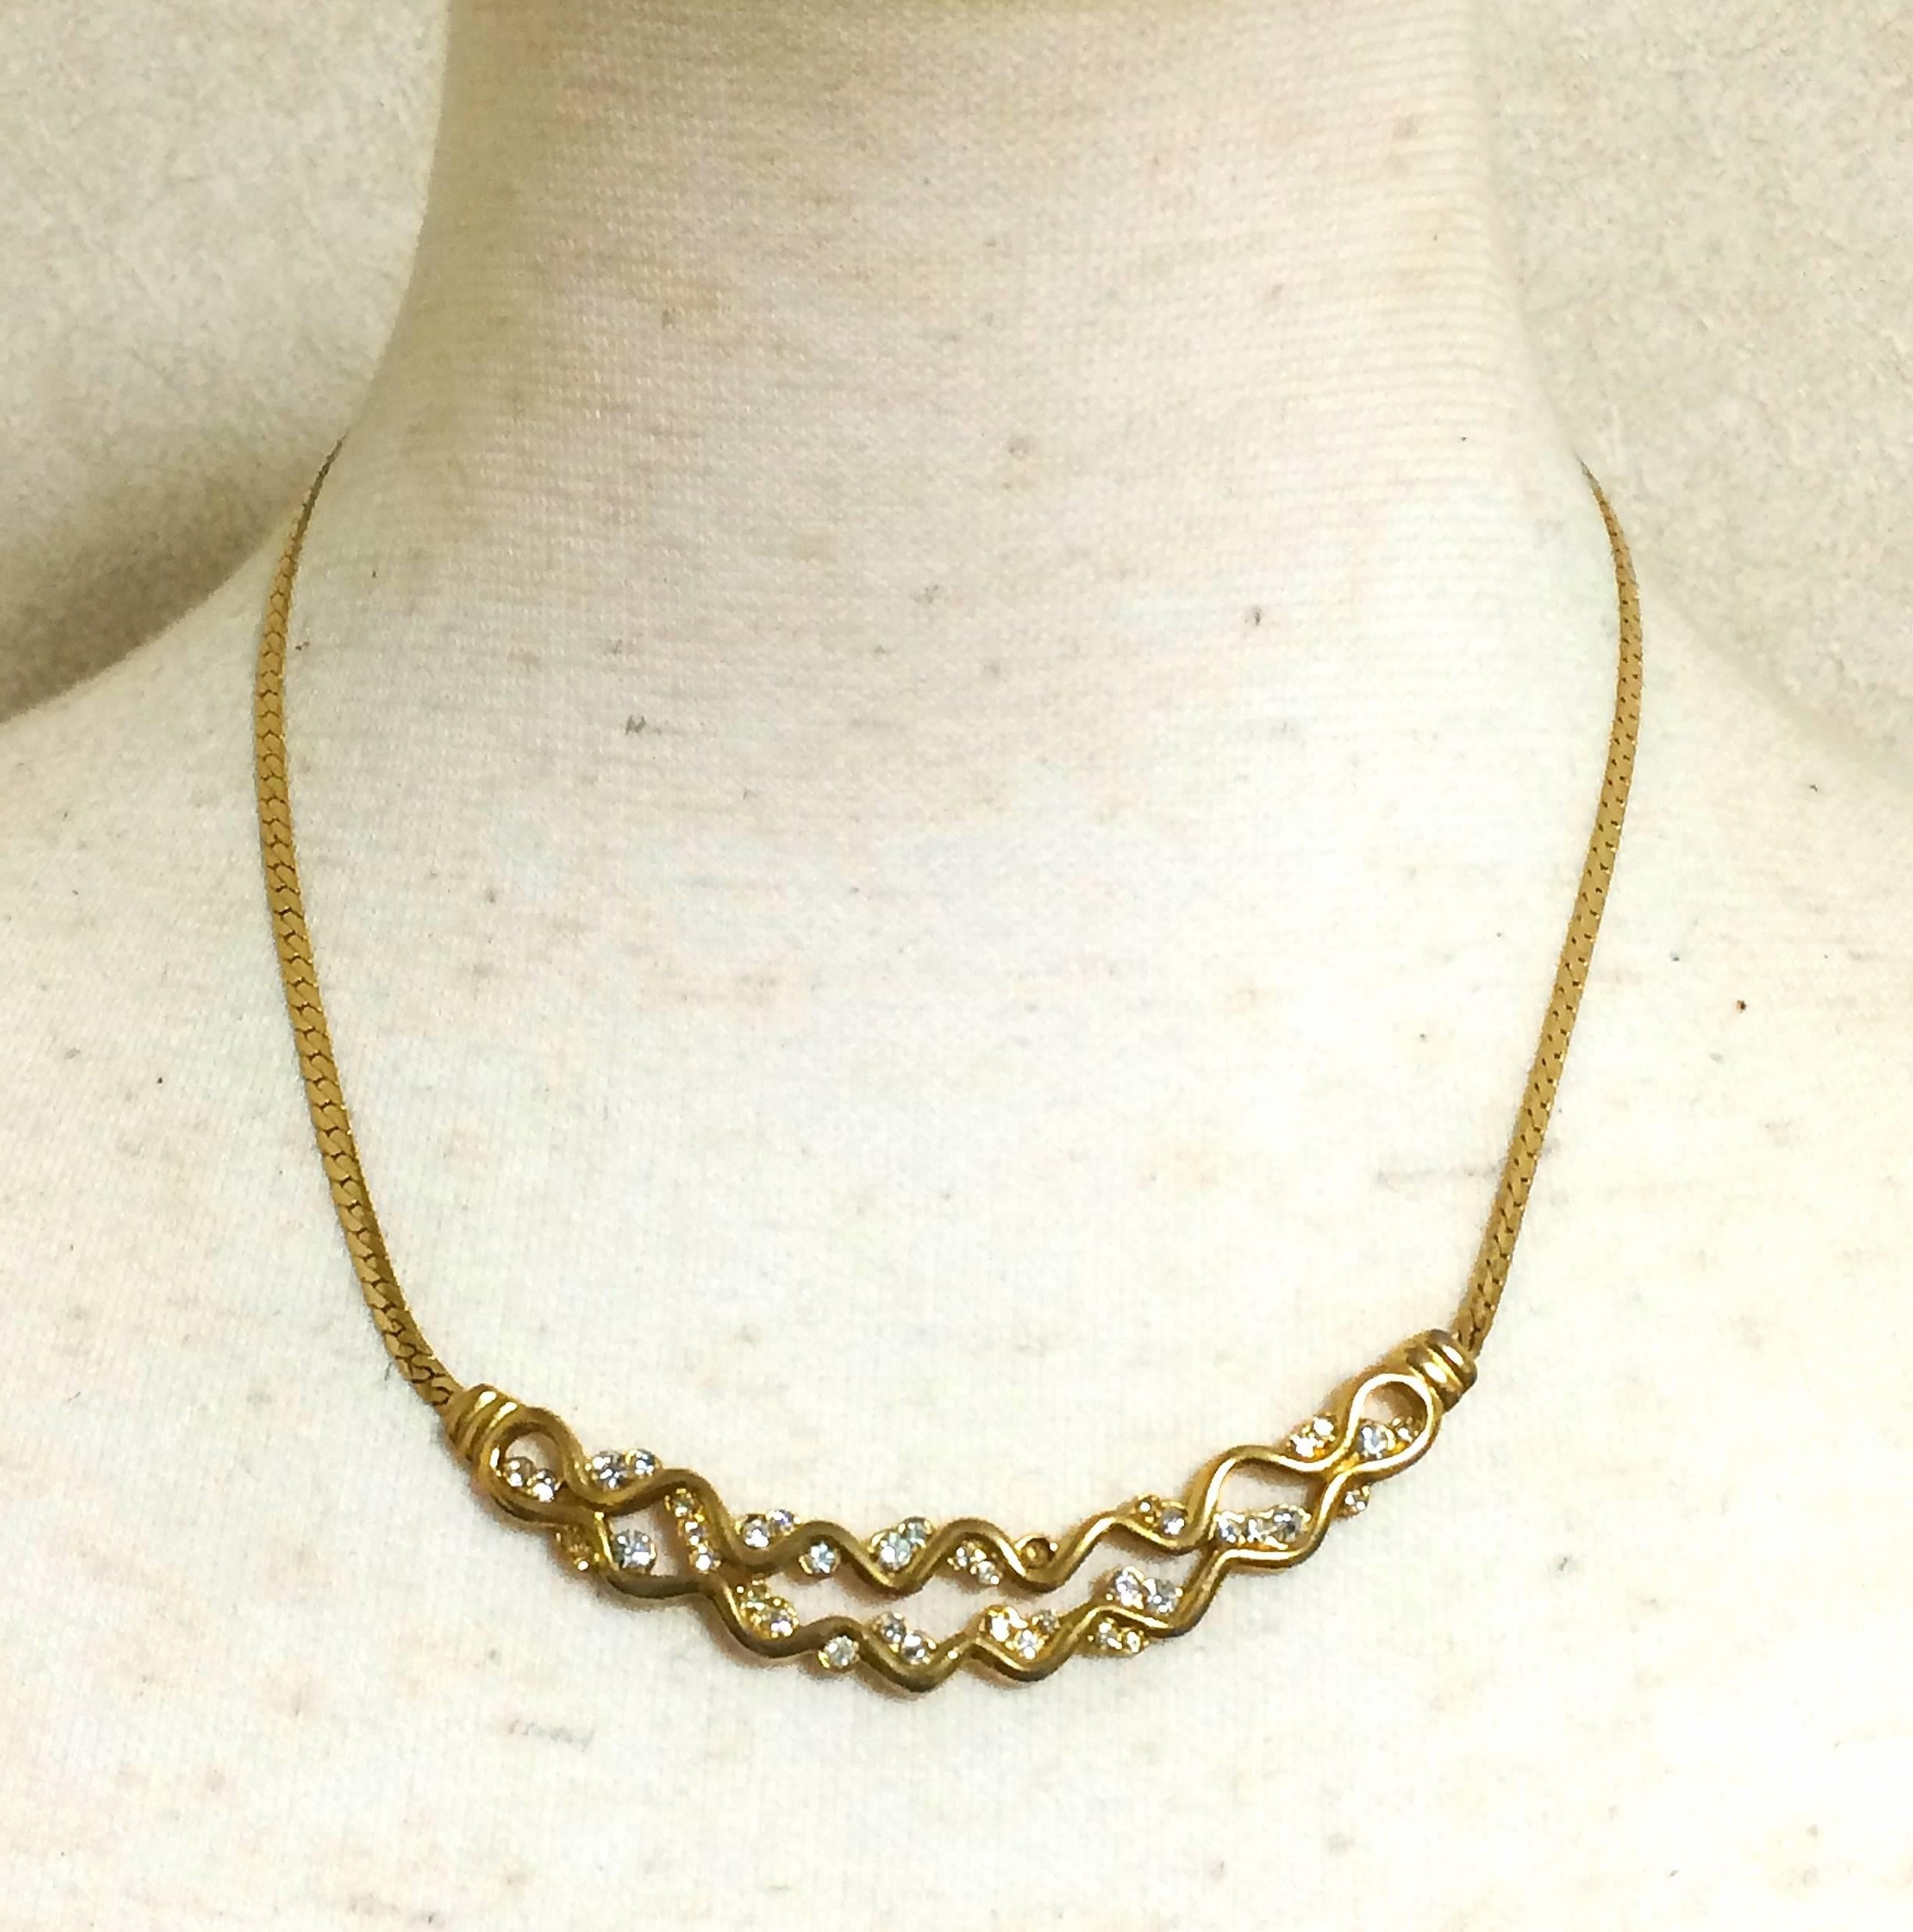 1990s. Vintage Givenchy double wave design flap chain necklace with rhinestone crystals. Classic and simple statement necklace in the era. Audrey Hepburn

Another FAB and stunning jewelry necklace from GIVENCHY back in 90's.
Flat chain necklace